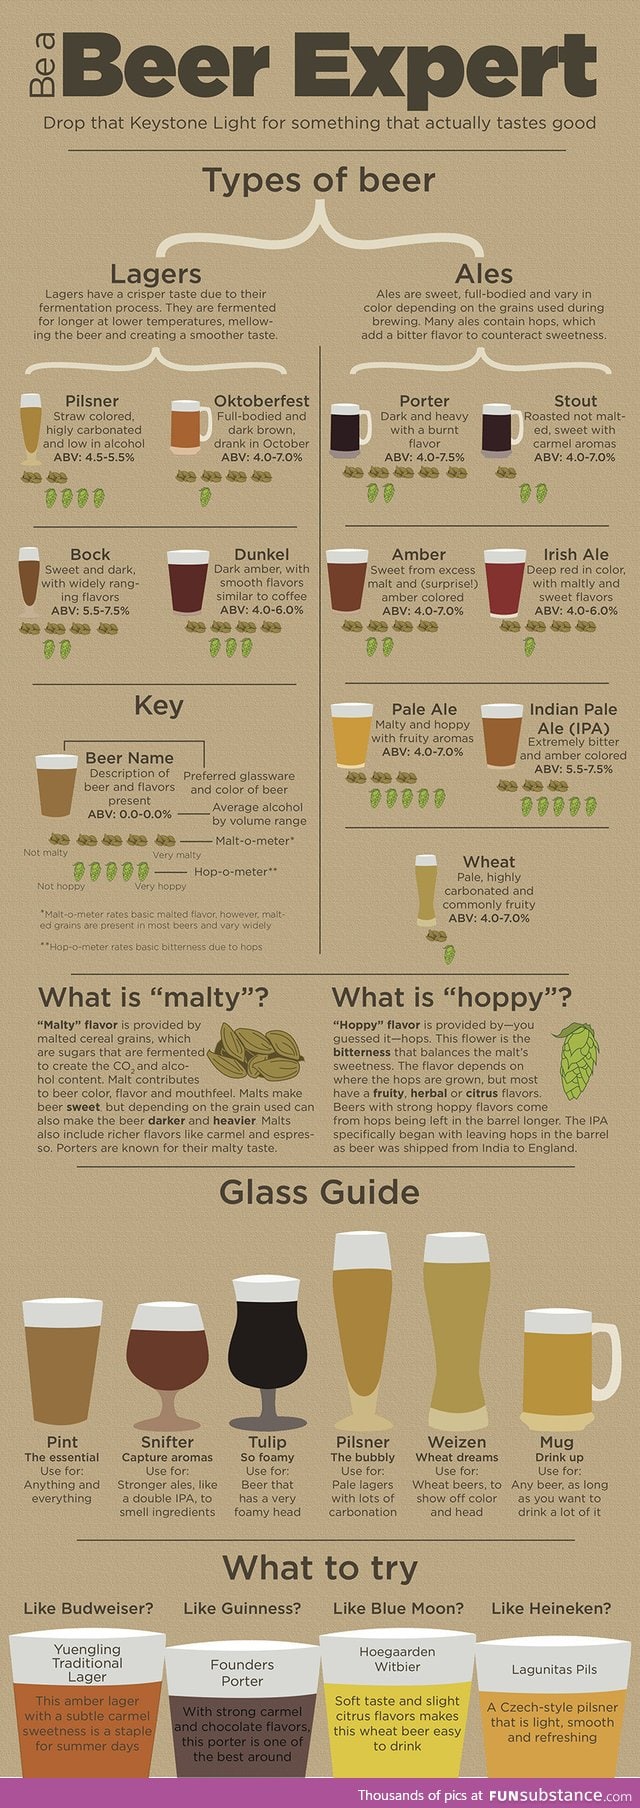 How to be a beer expert